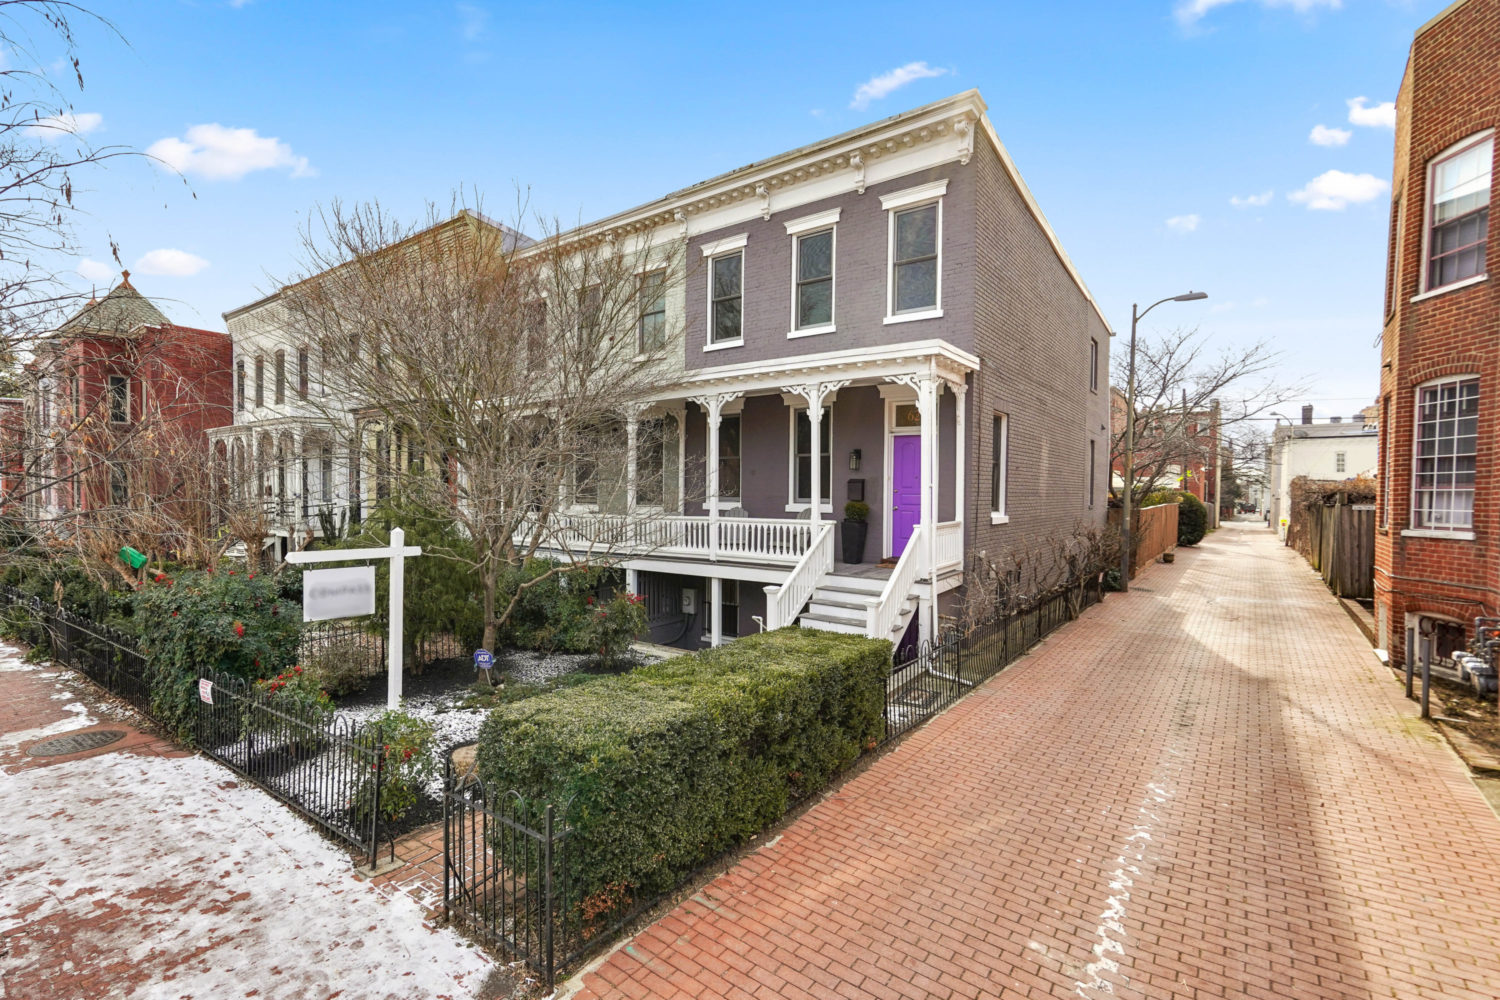 Gorgeous 4BR/3.5BA Historic End-Unit Rowhouse in Capitol Hill